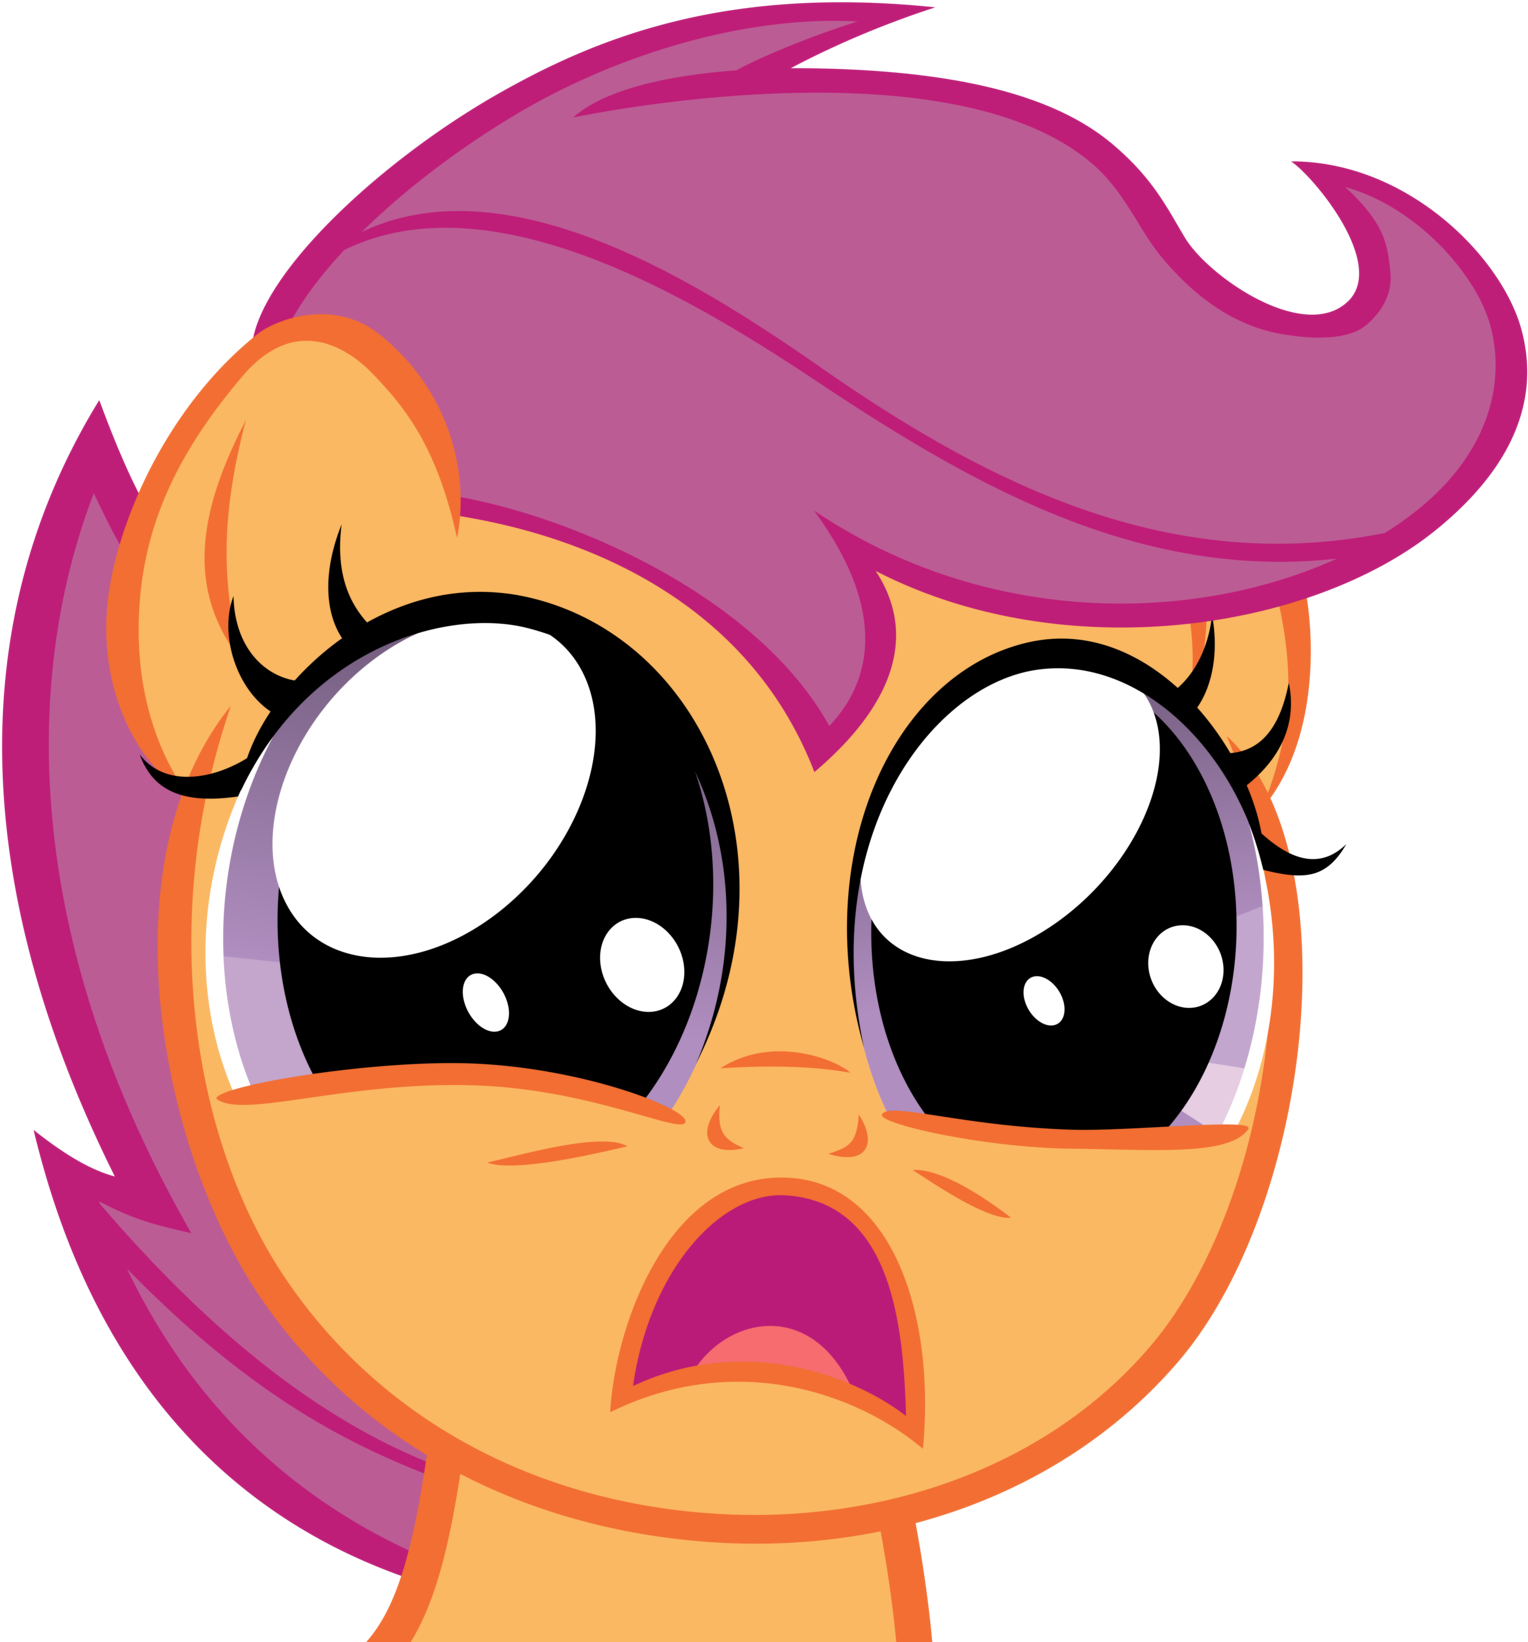 You Scared Scootaloo By Magister39 You Scared Scootaloo - Sad Scootaloo Face (1600x1655)